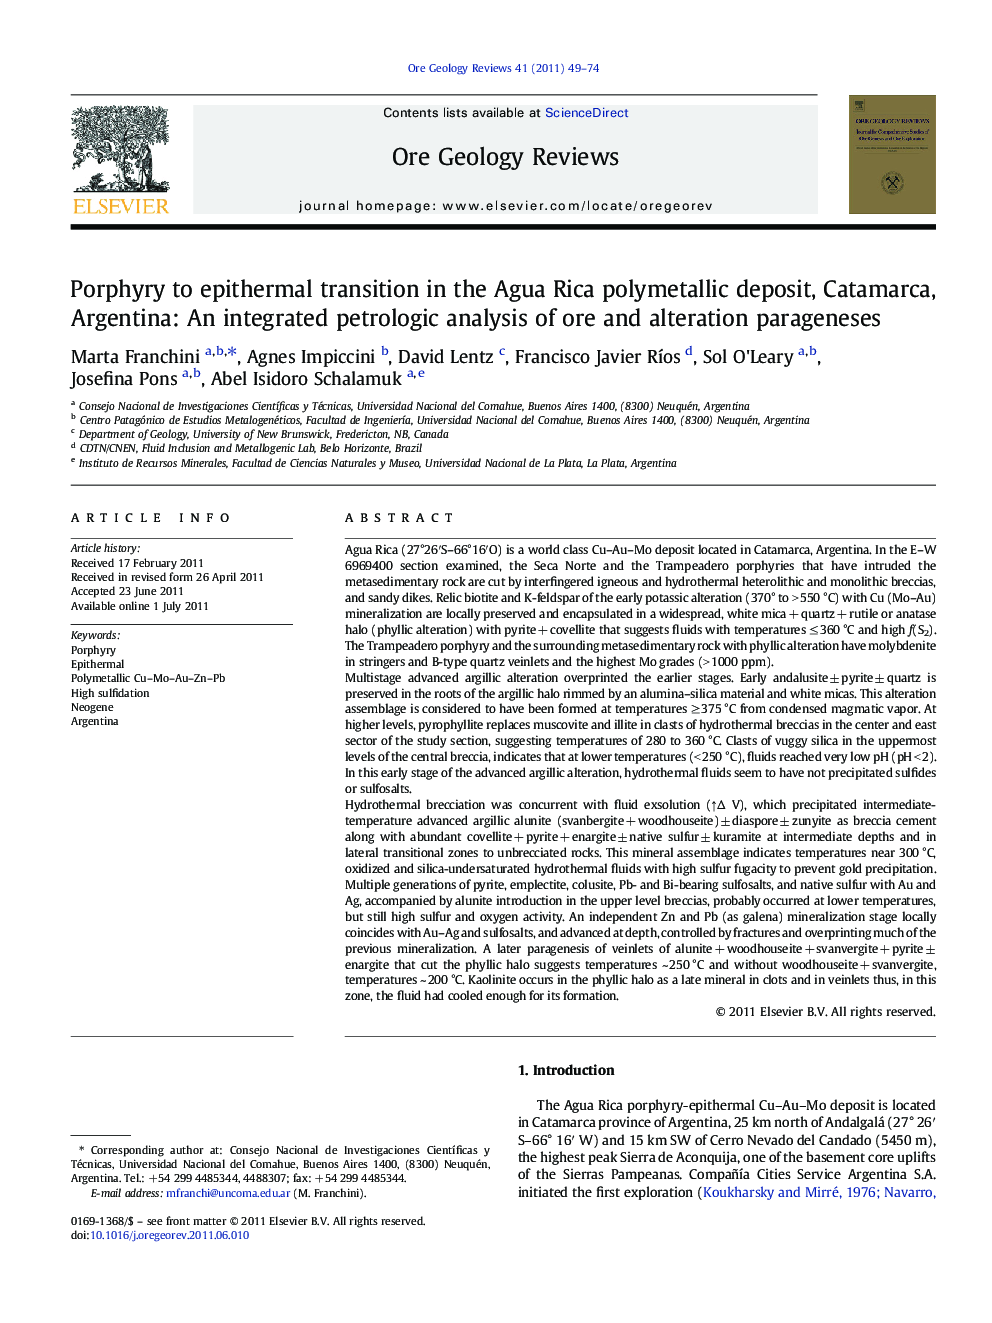 Porphyry to epithermal transition in the Agua Rica polymetallic deposit, Catamarca, Argentina: An integrated petrologic analysis of ore and alteration parageneses